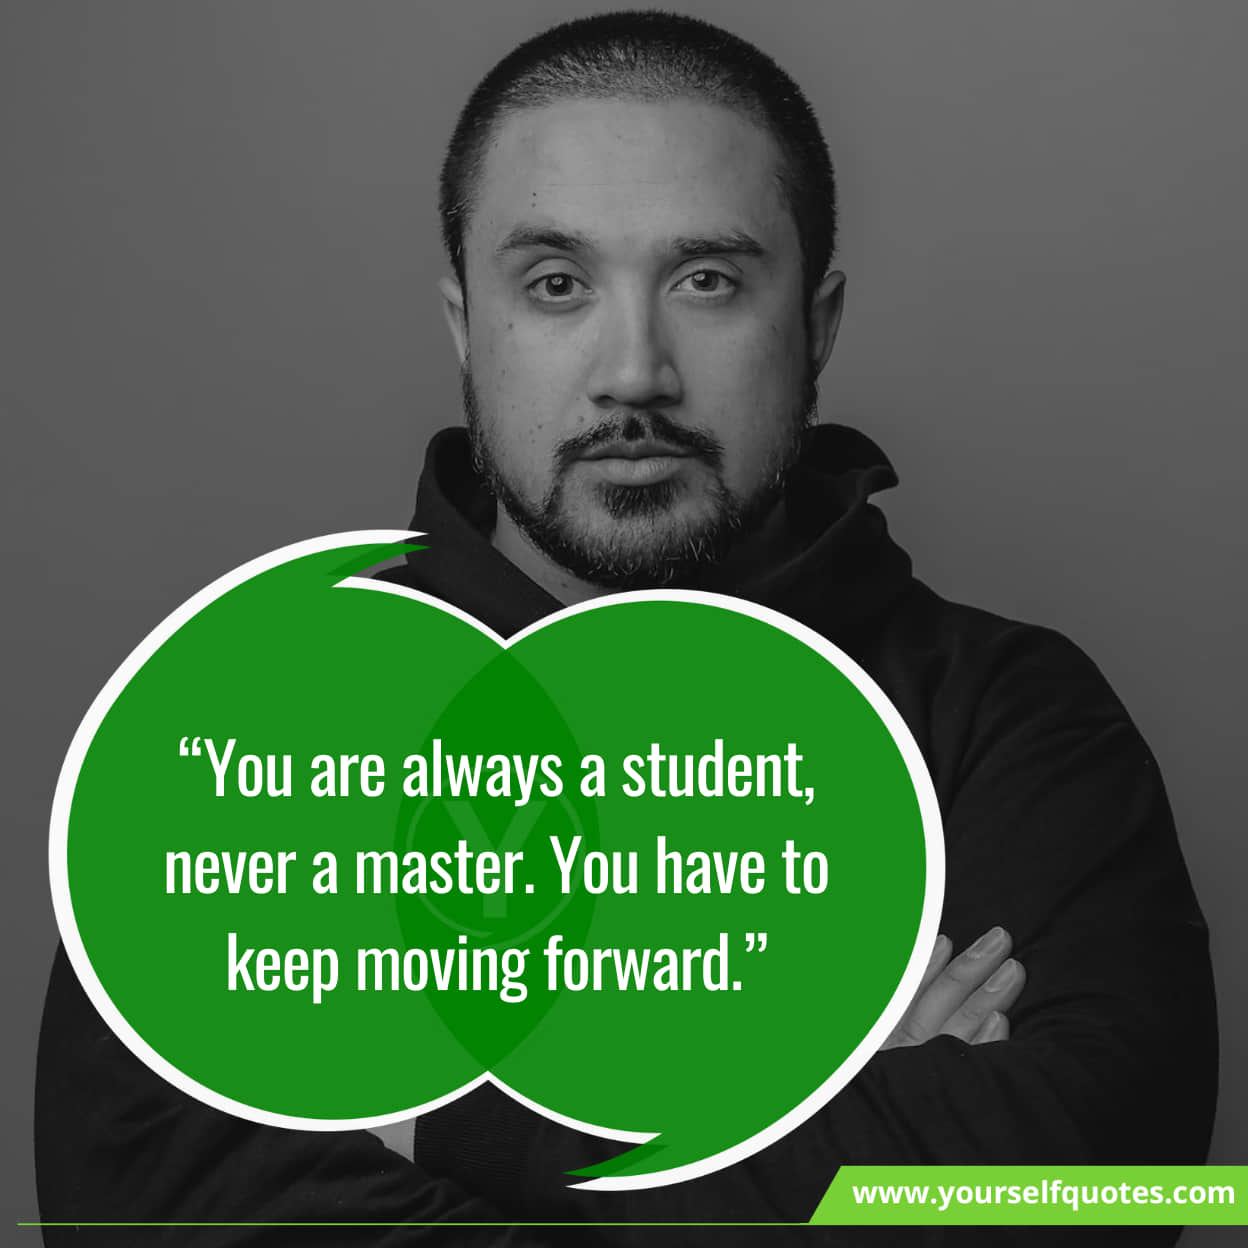 Keep Moving Forward Quotes To Move Forward